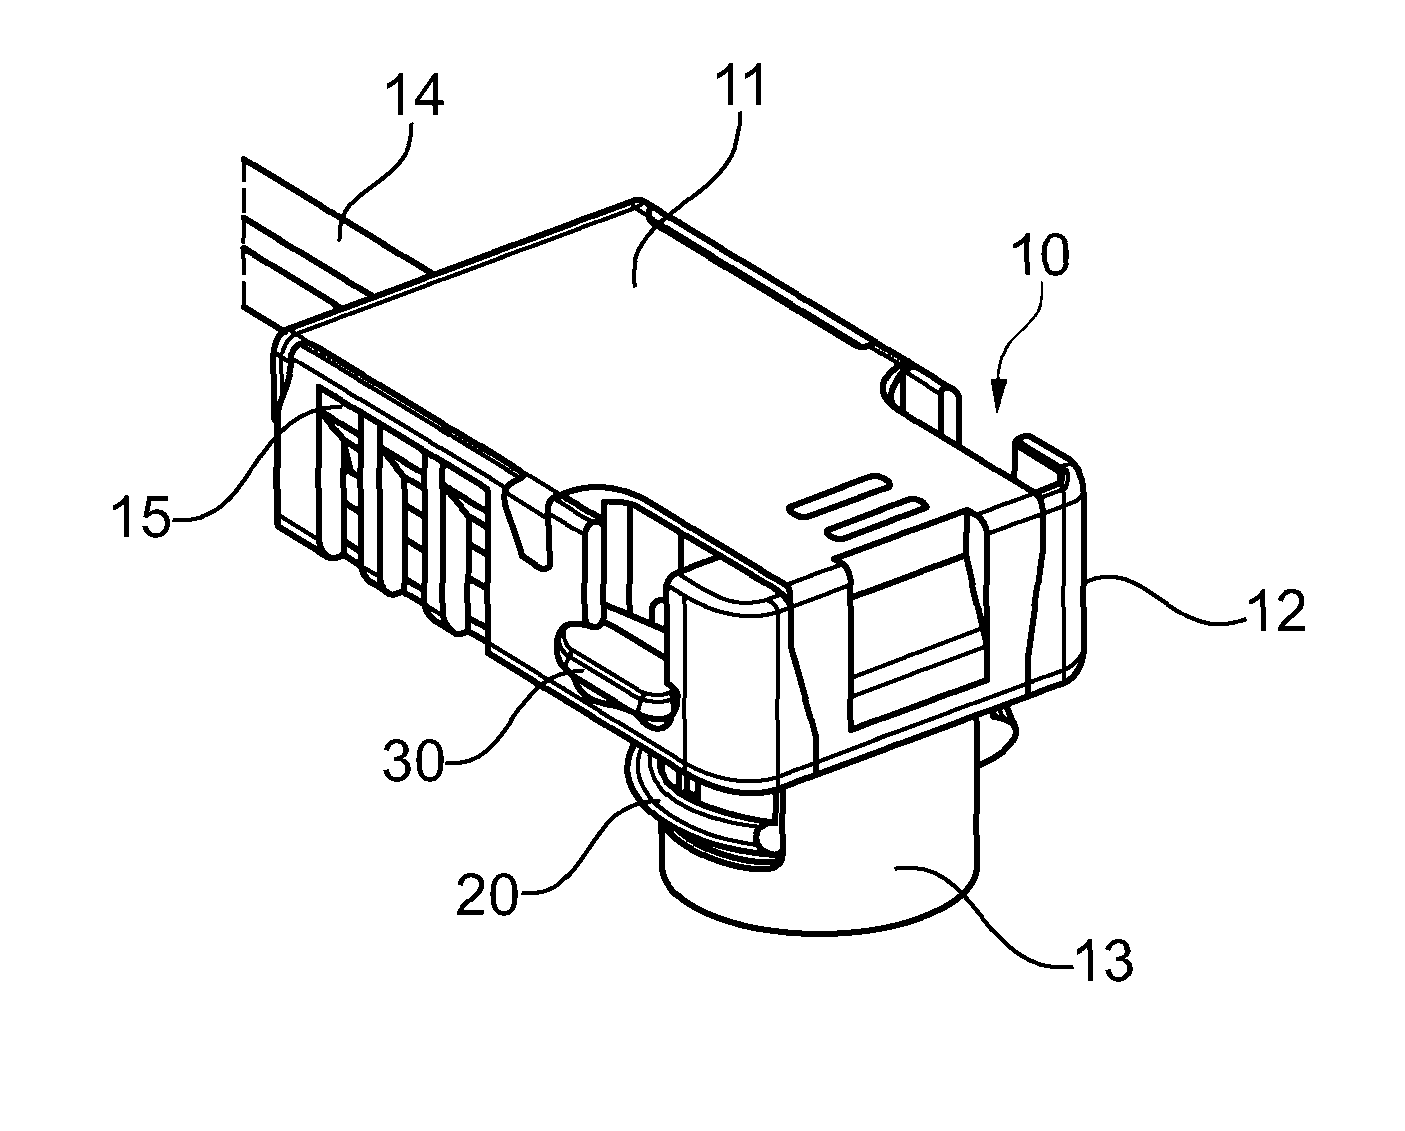 Connector assembly with automatic secondary lock